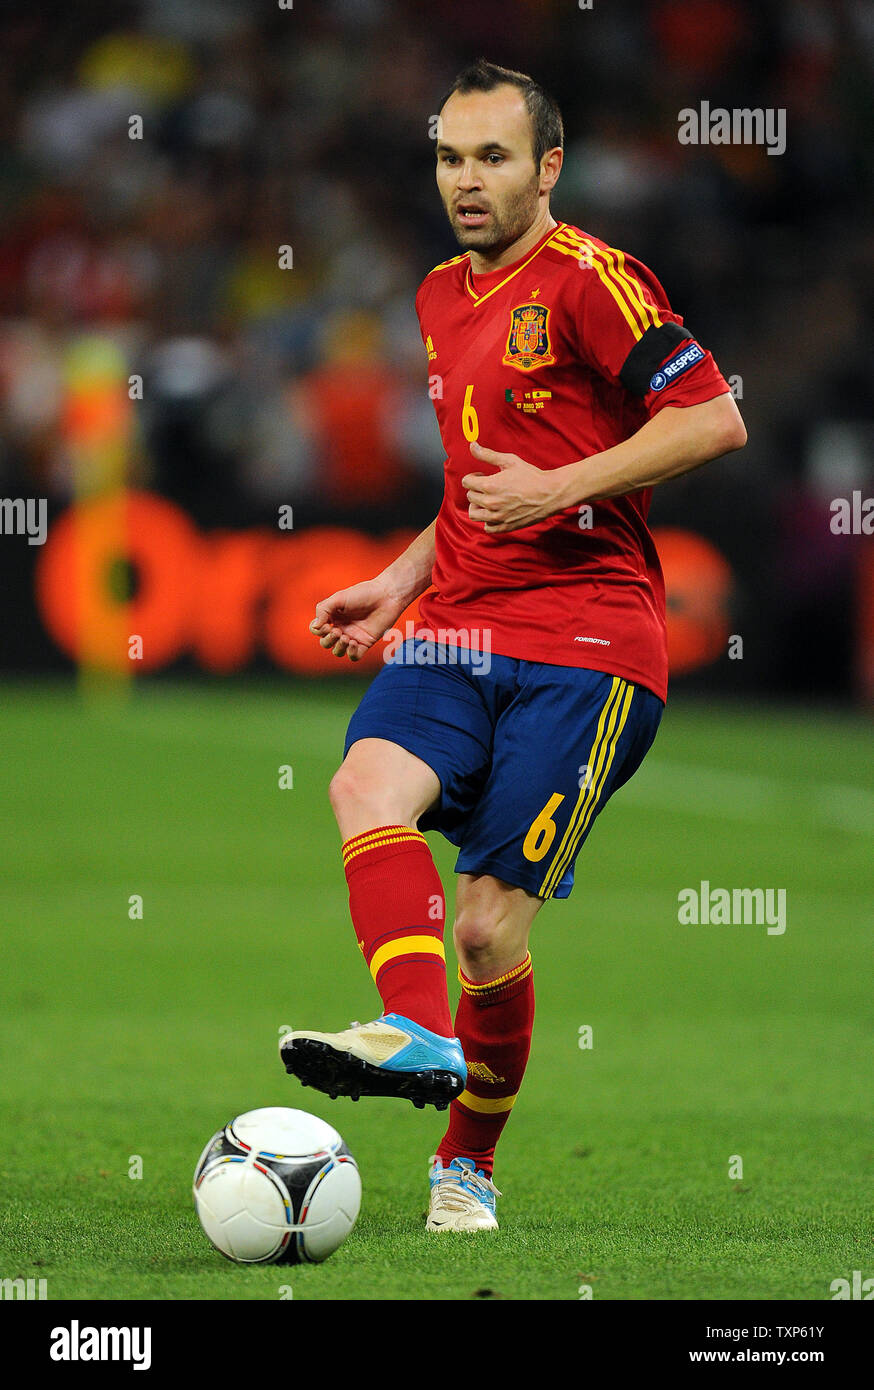 Andres Iniesta of Spain moves the ball during the Euro 2012 Semi-Final match at Donbass Arena in Donetsk, Ukraine on June 27, 2012. UPI/Chris Brunskill Stock Photo